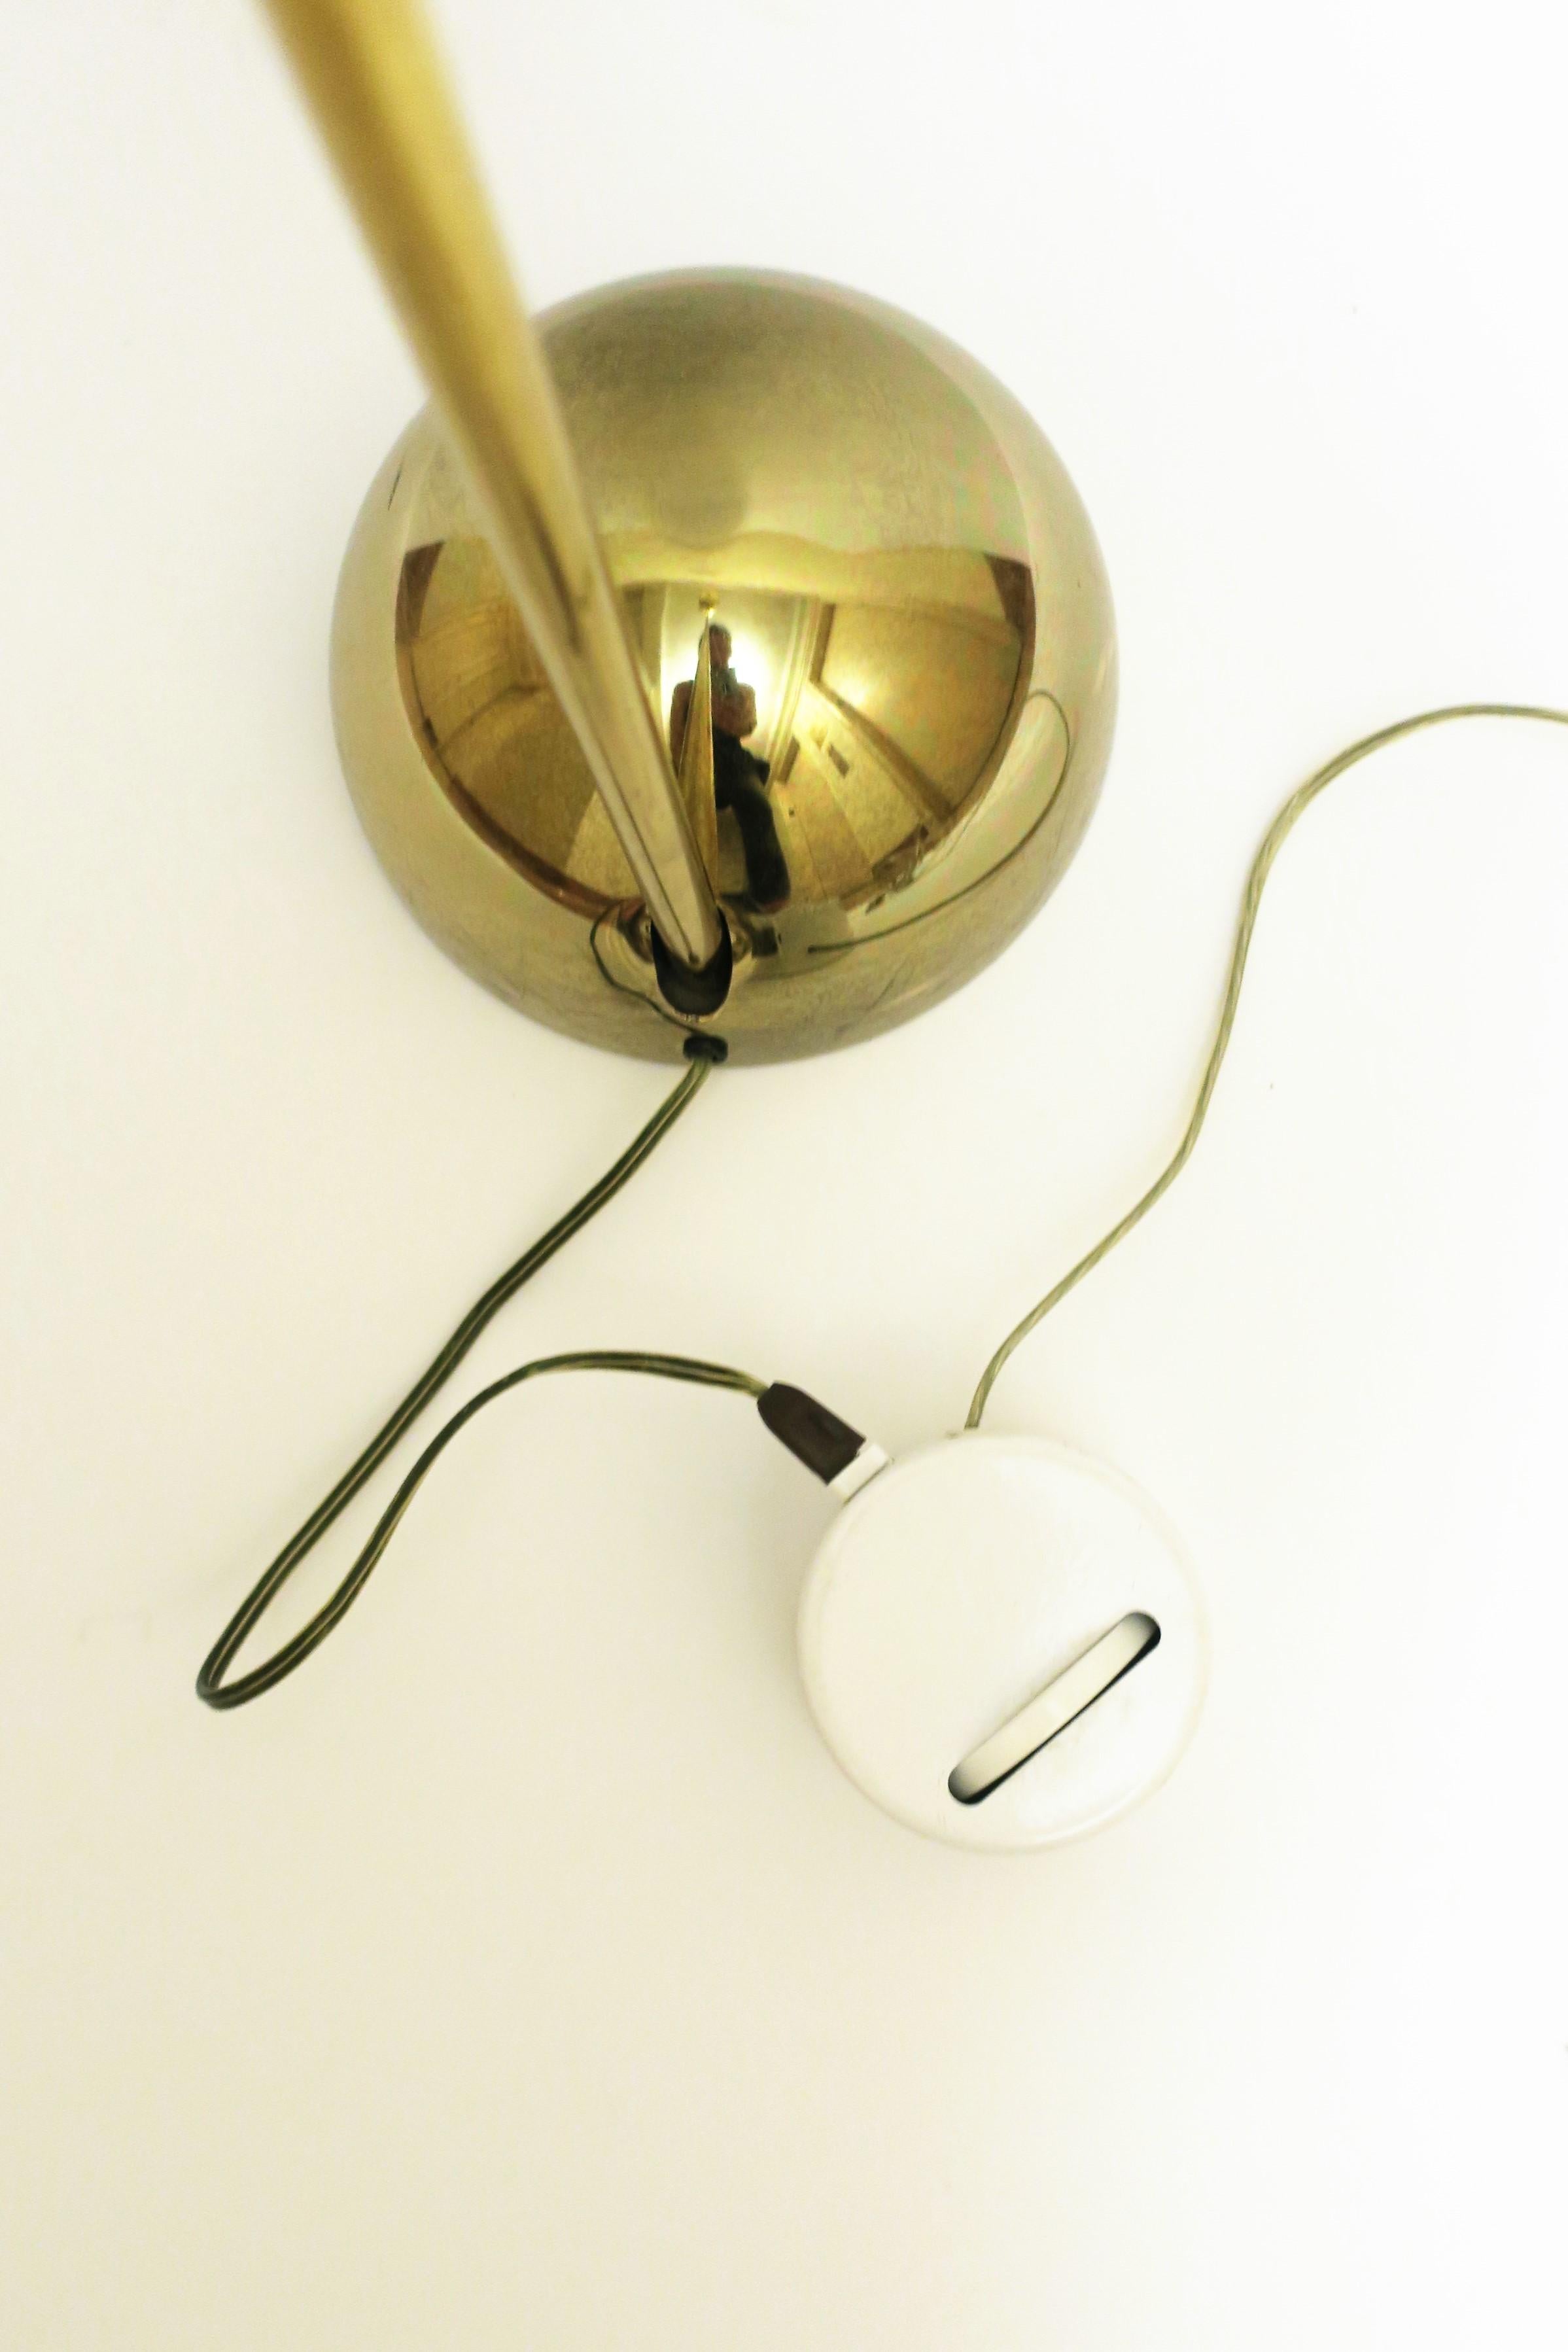 Modern Brass Plated Floor Lamp, circa 1970s For Sale 3